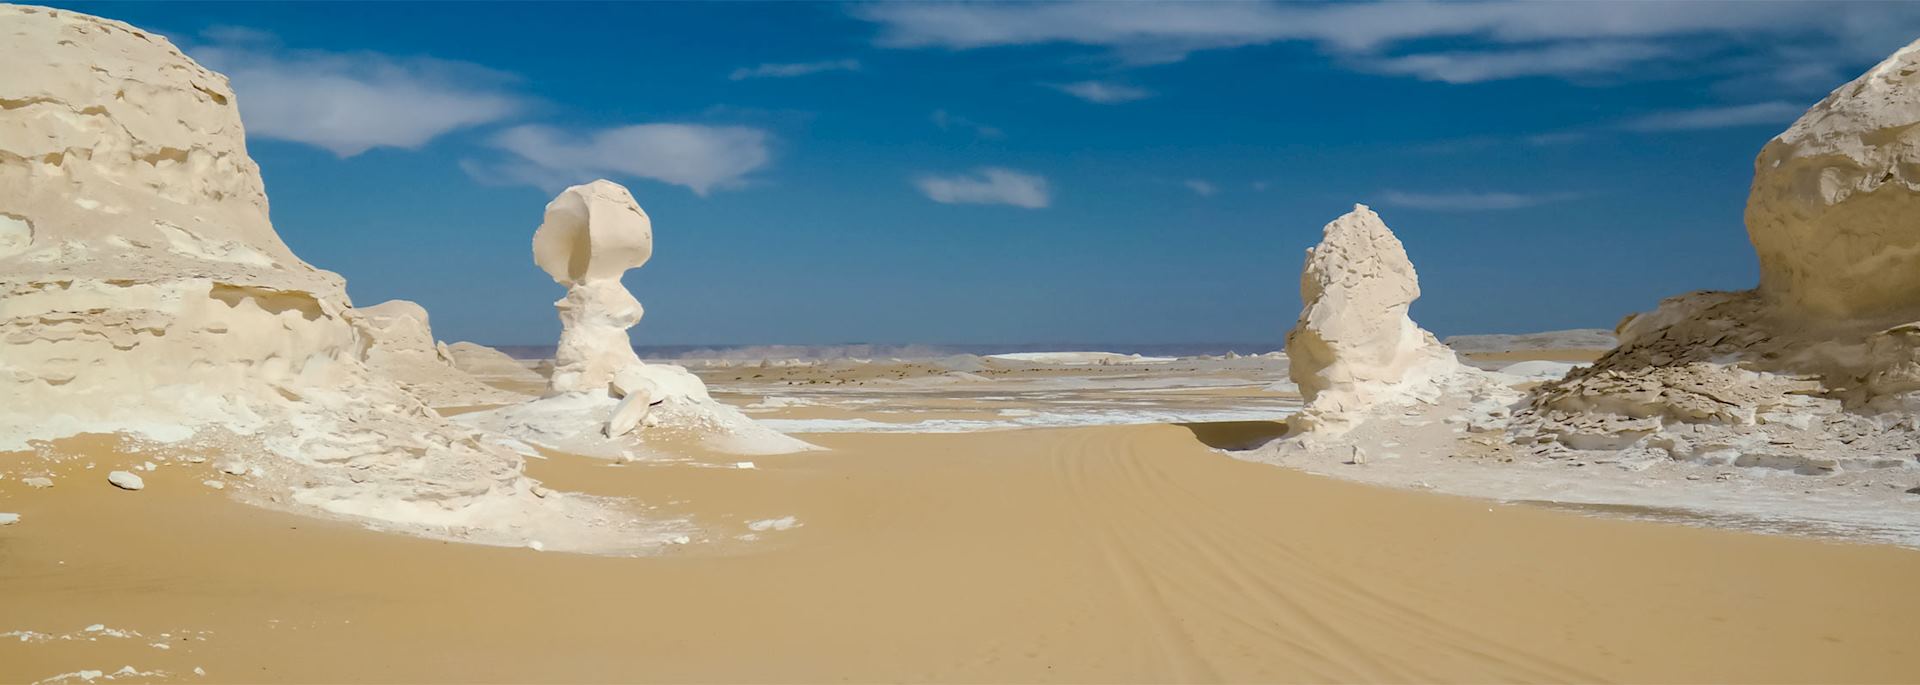 Natural sculptures in the White Desert